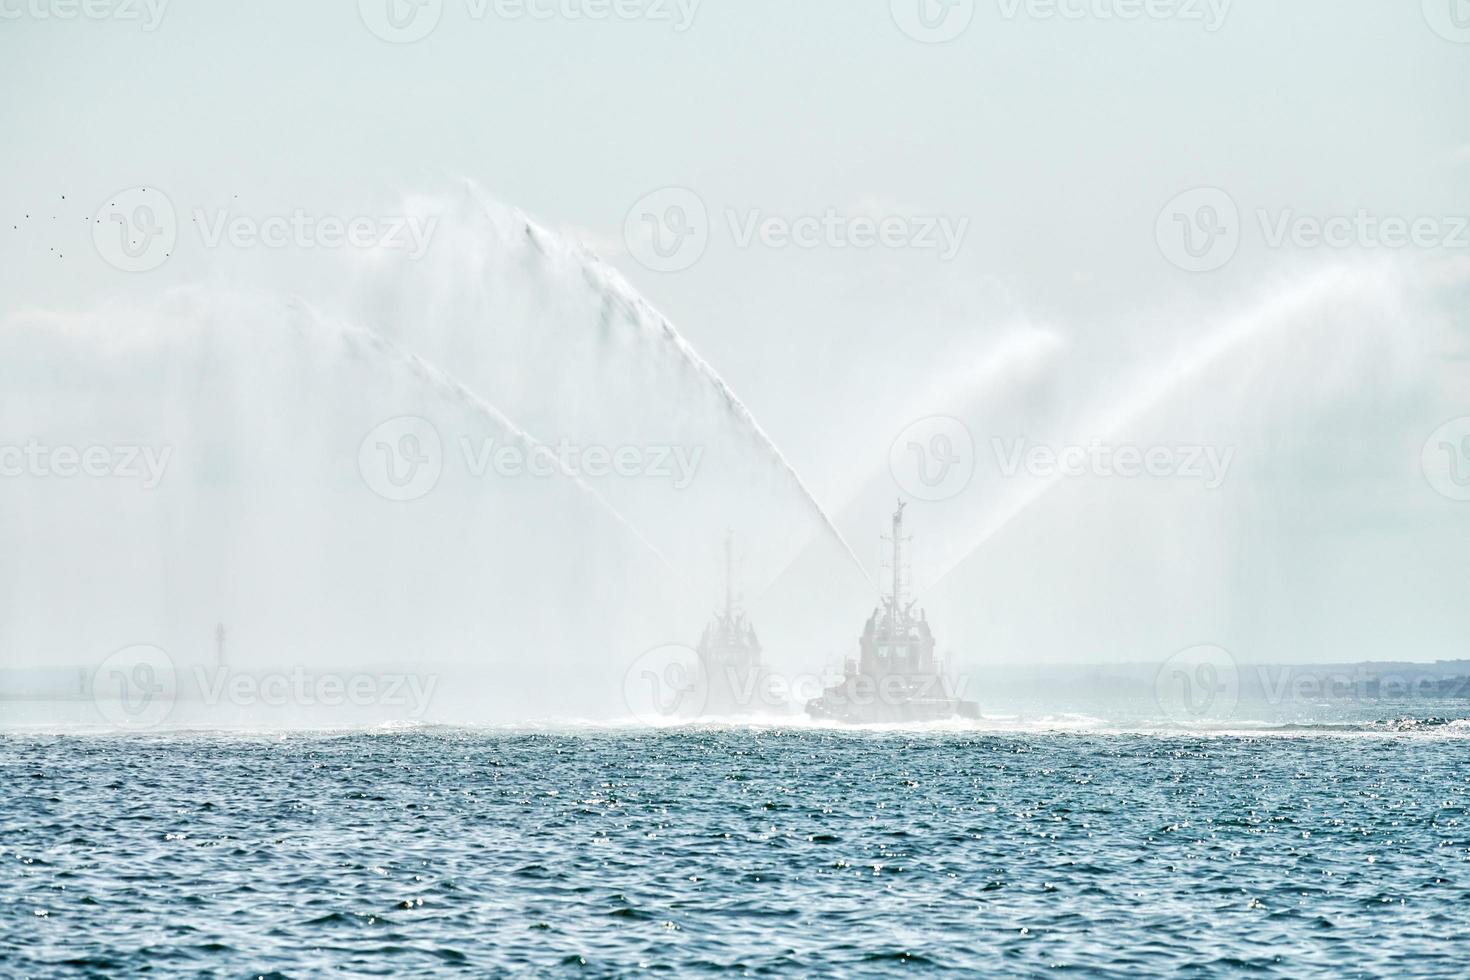 Tug boats spraying jets of water, demonstrating firefighting water cannons, fire boats spraying foam photo